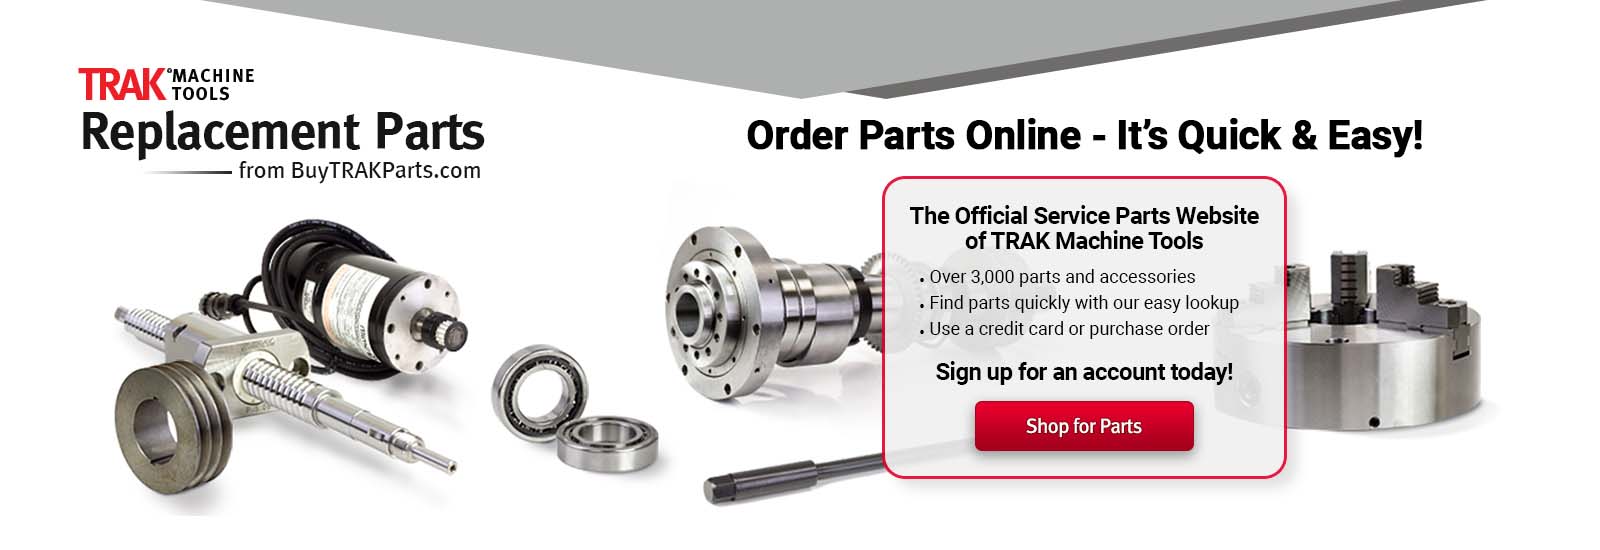 Buy Replacement Parts Online at BuyTrakParts.com